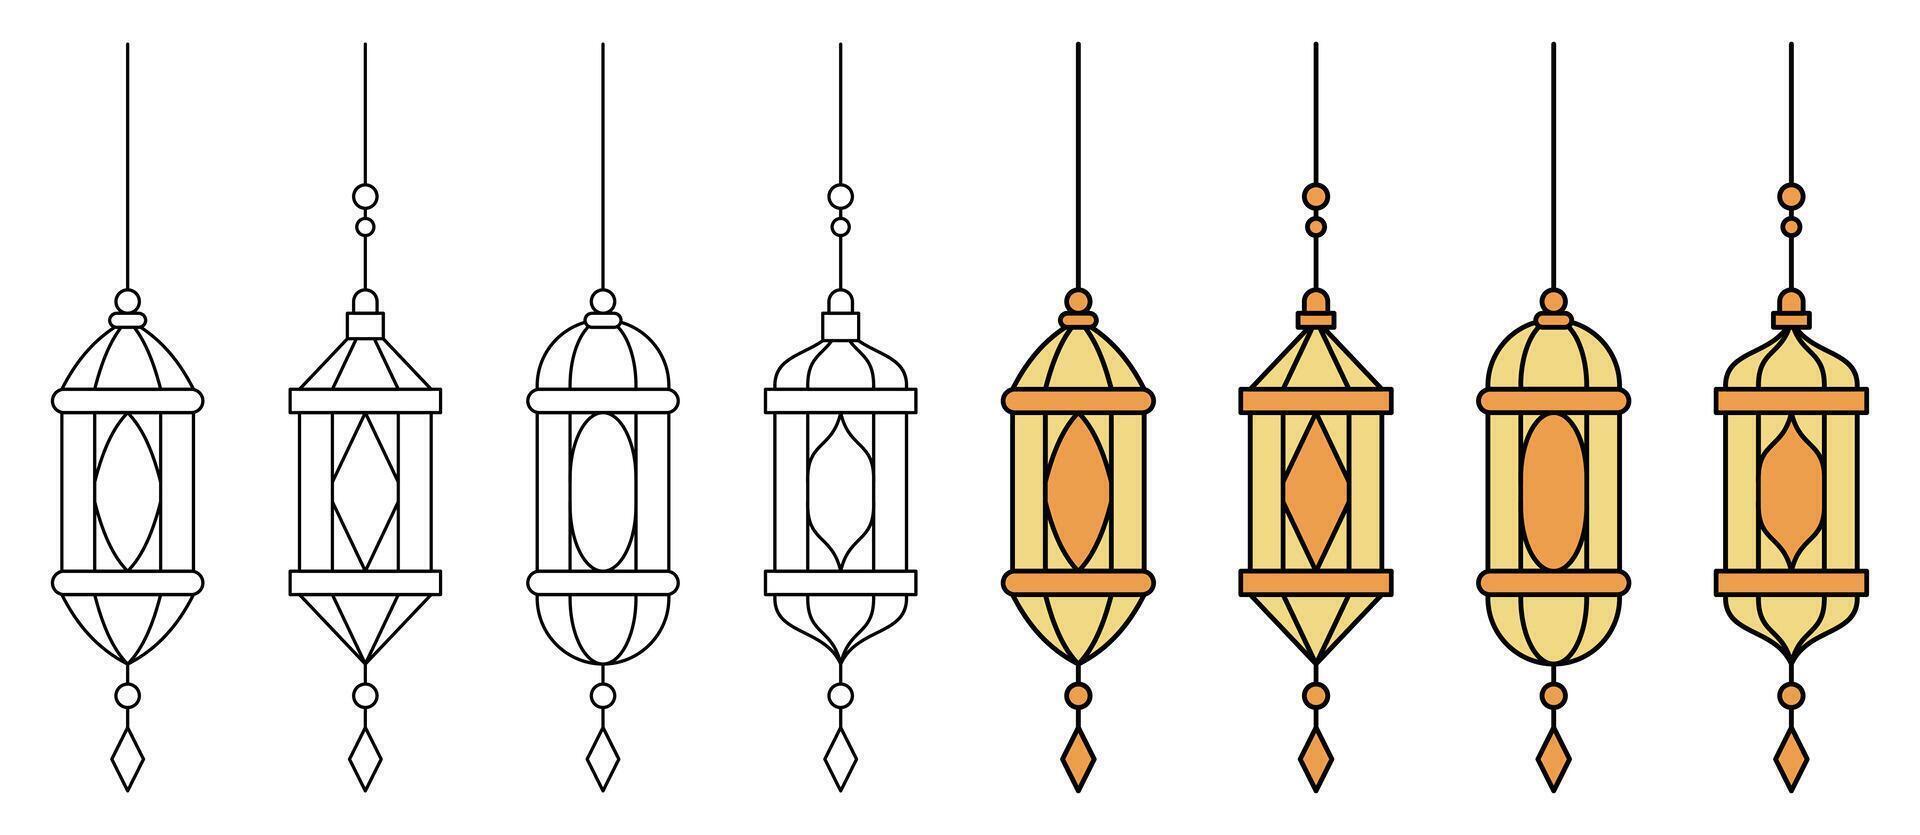 collection of arabic lantern ornaments, simple vector isolated on white background. Islamic design elements for greeting cards, posters, banners, social media.